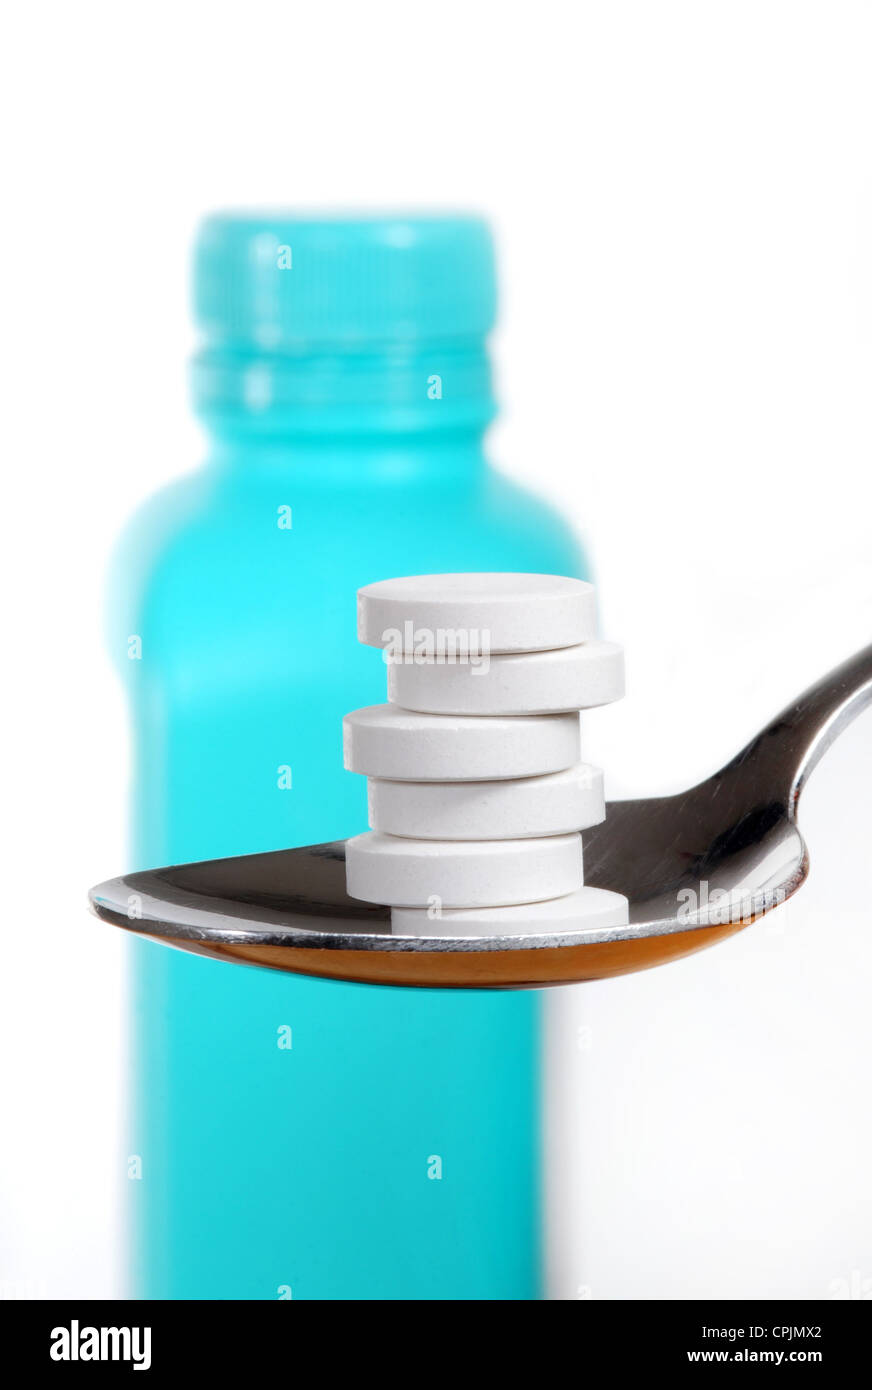 Antacid tablets on a spoon, a bottle of antacid blurred in the background Stock Photo